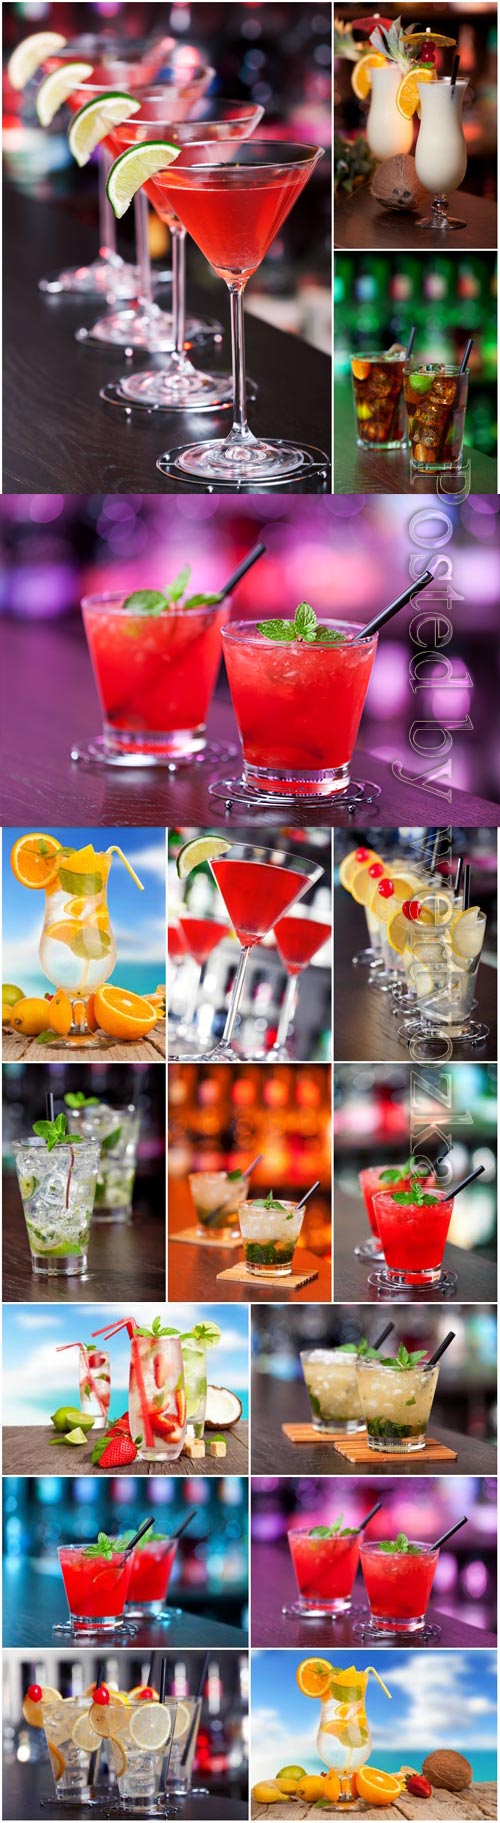 Summer cocktails stock photo